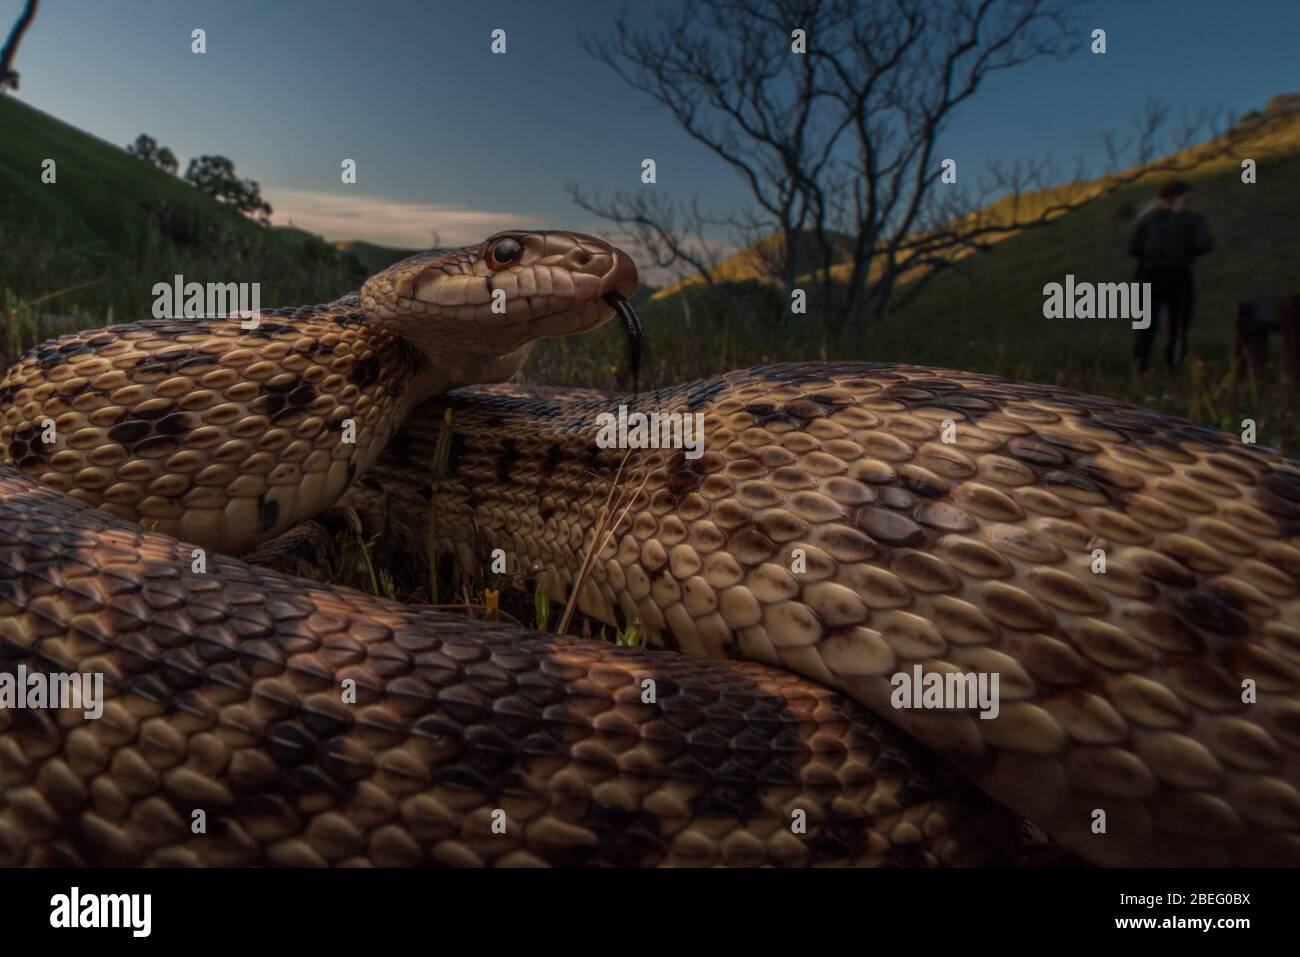 A gopher snake from the Bay region of California, these snakes are quite common and feed on small rodents in the grasslands. Stock Photo